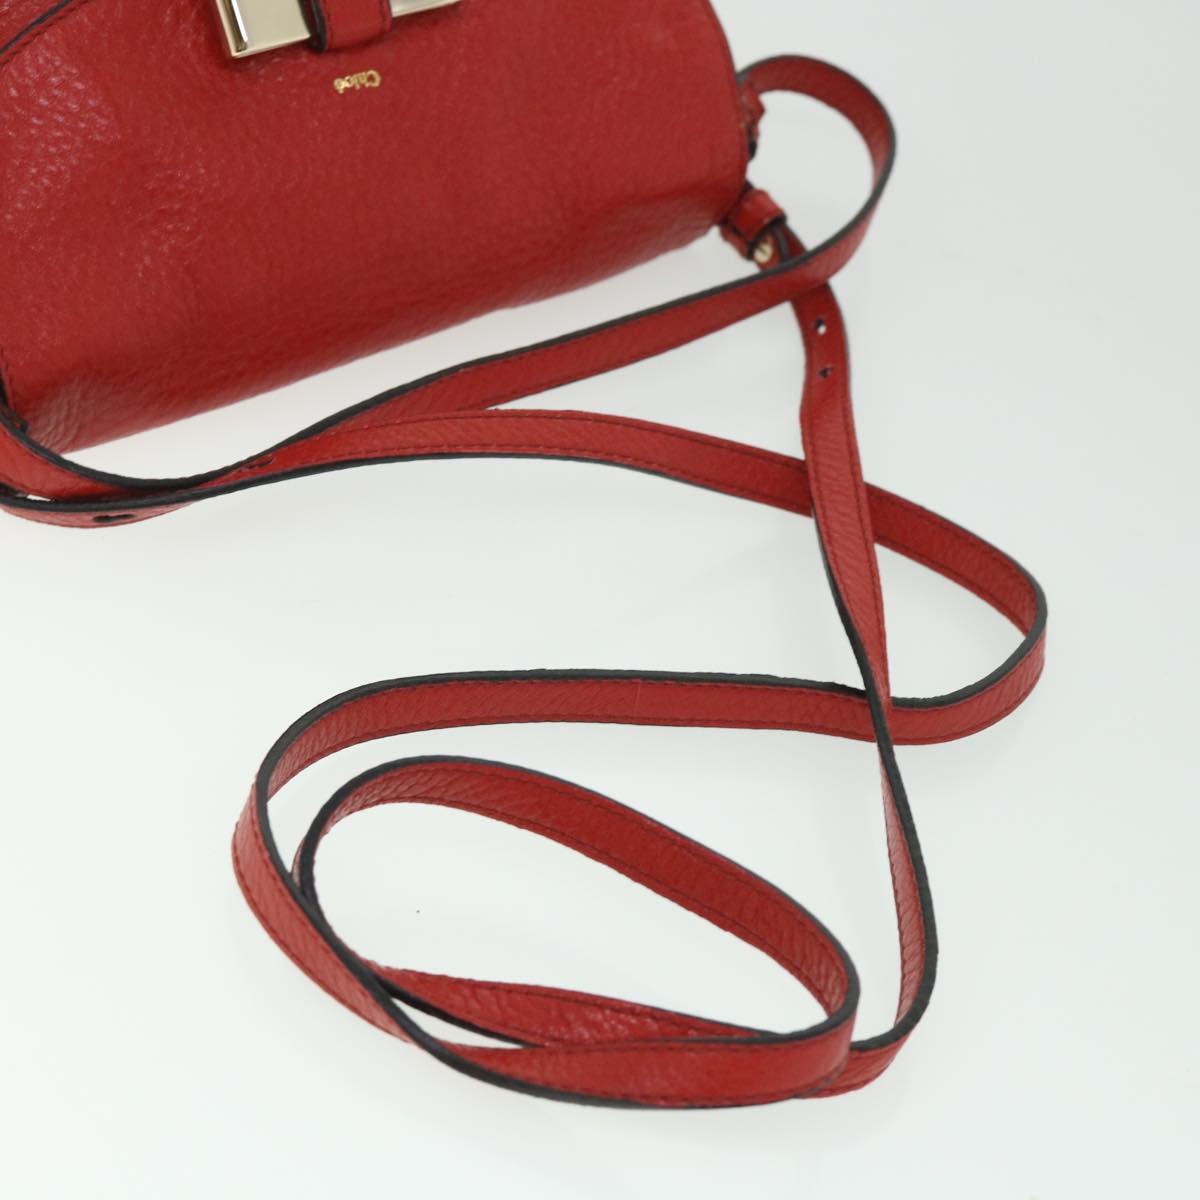 Chloe Accessory Pouch Leather 2way Red Auth yk8693